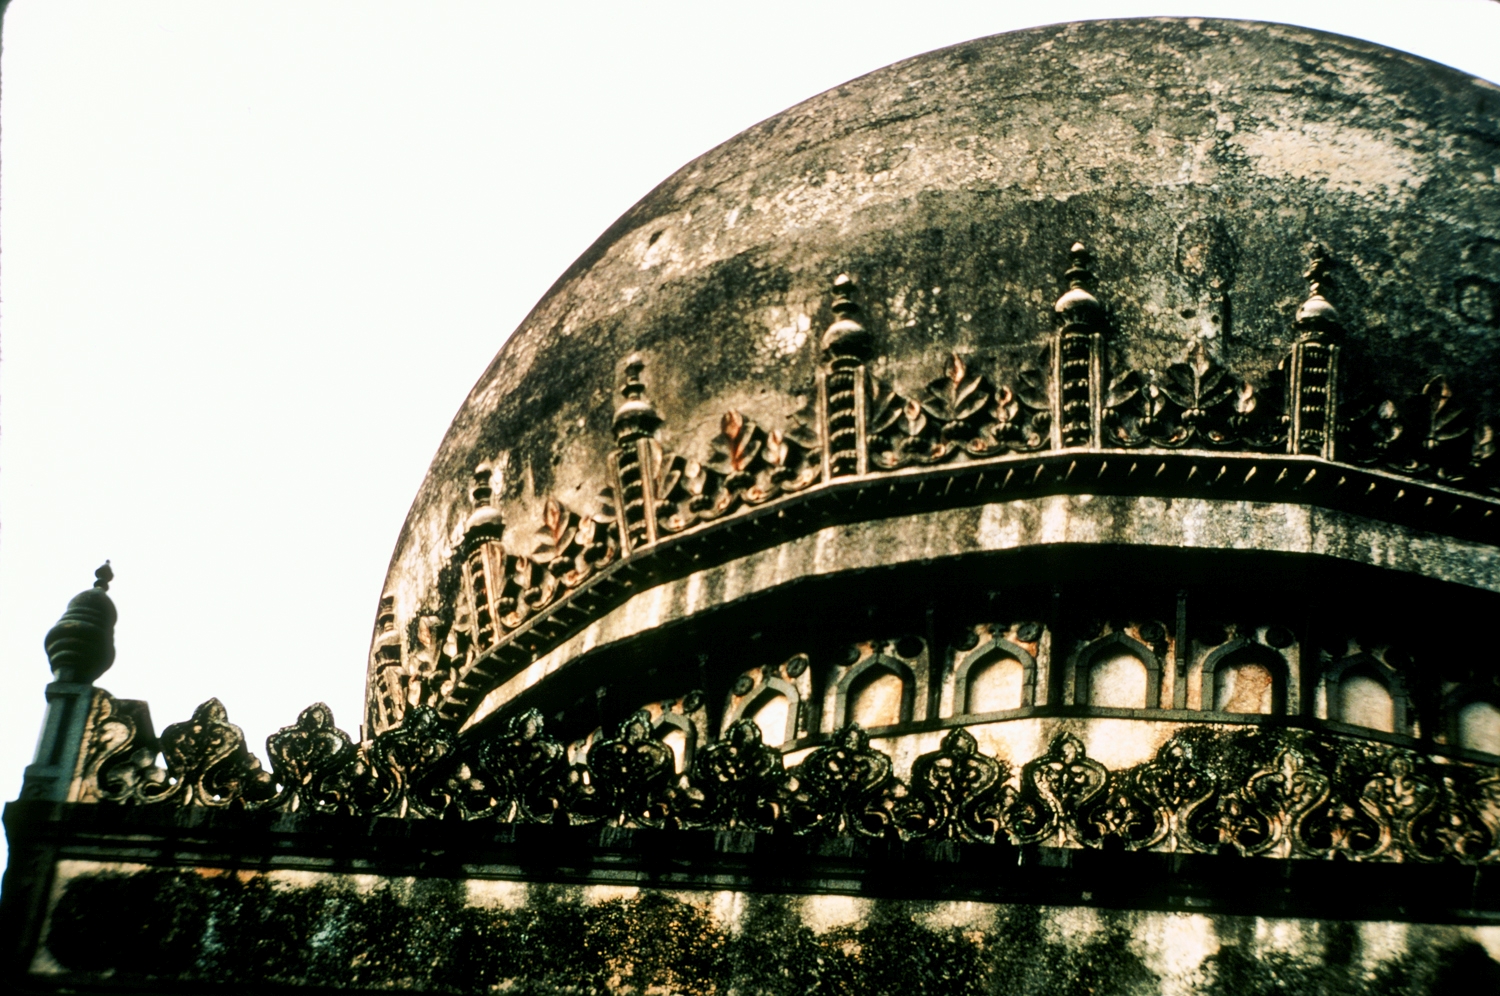 Exterior, detail of dome and drum